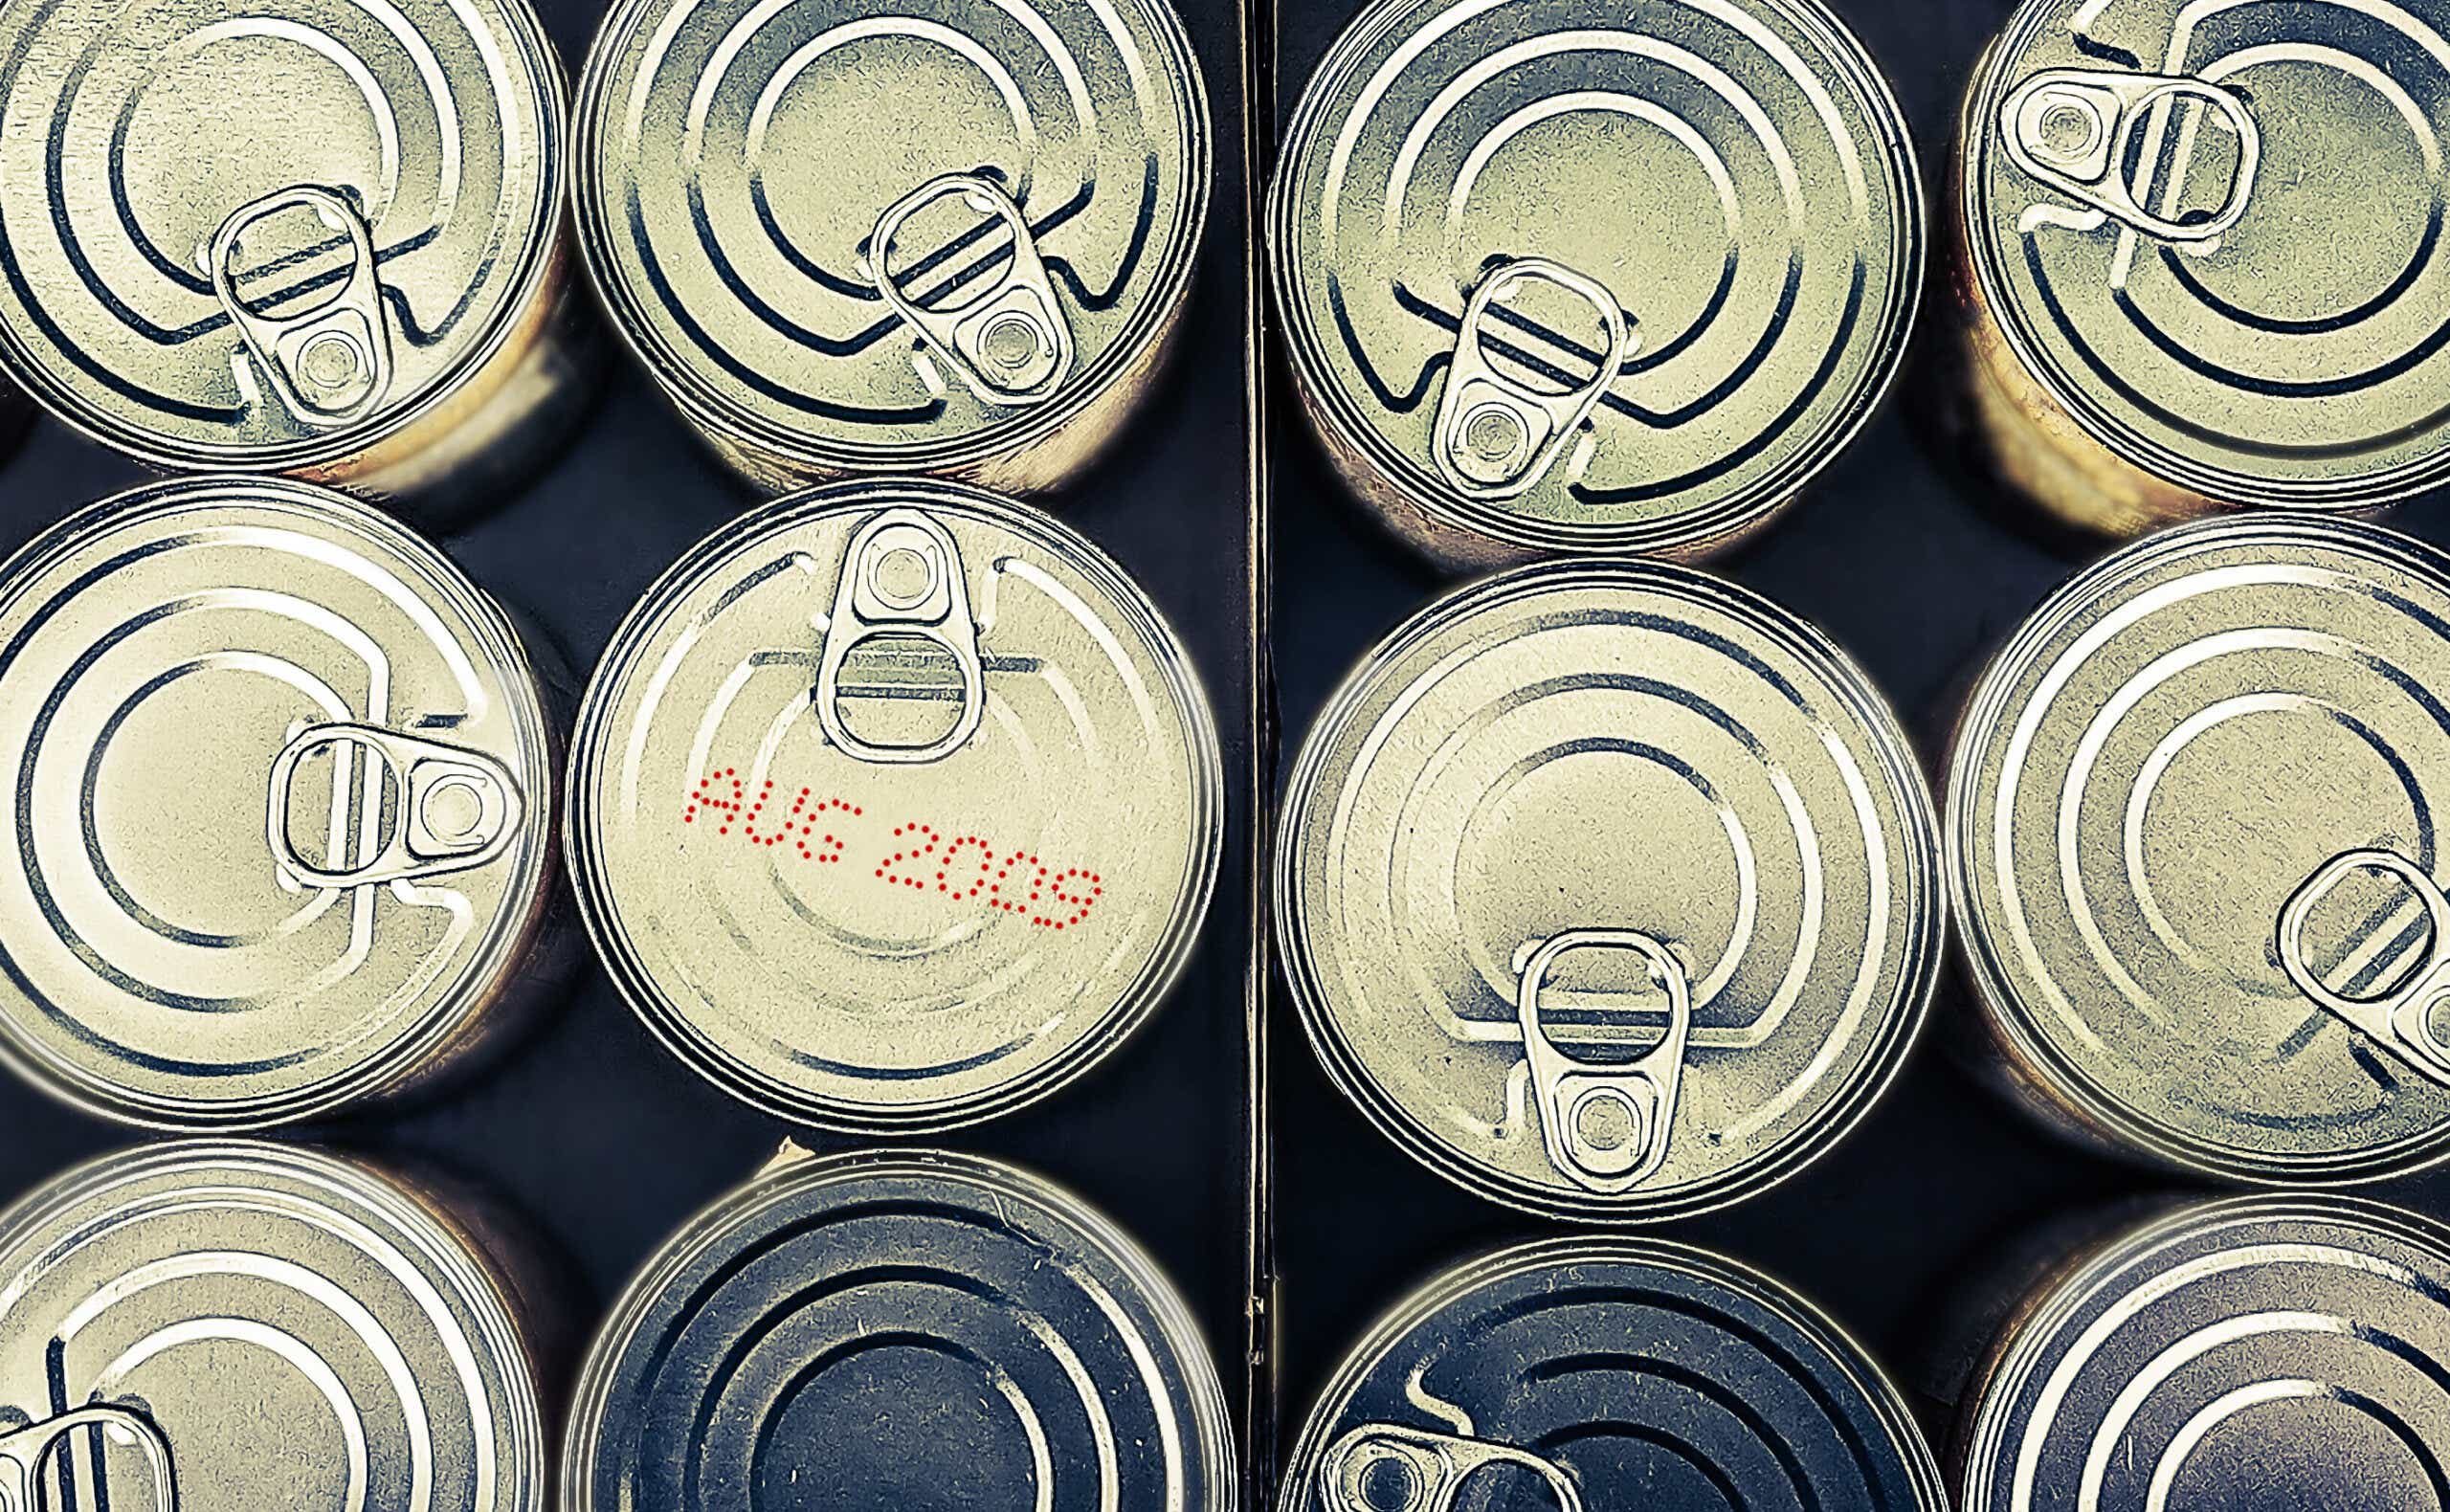 expiration dates on cans